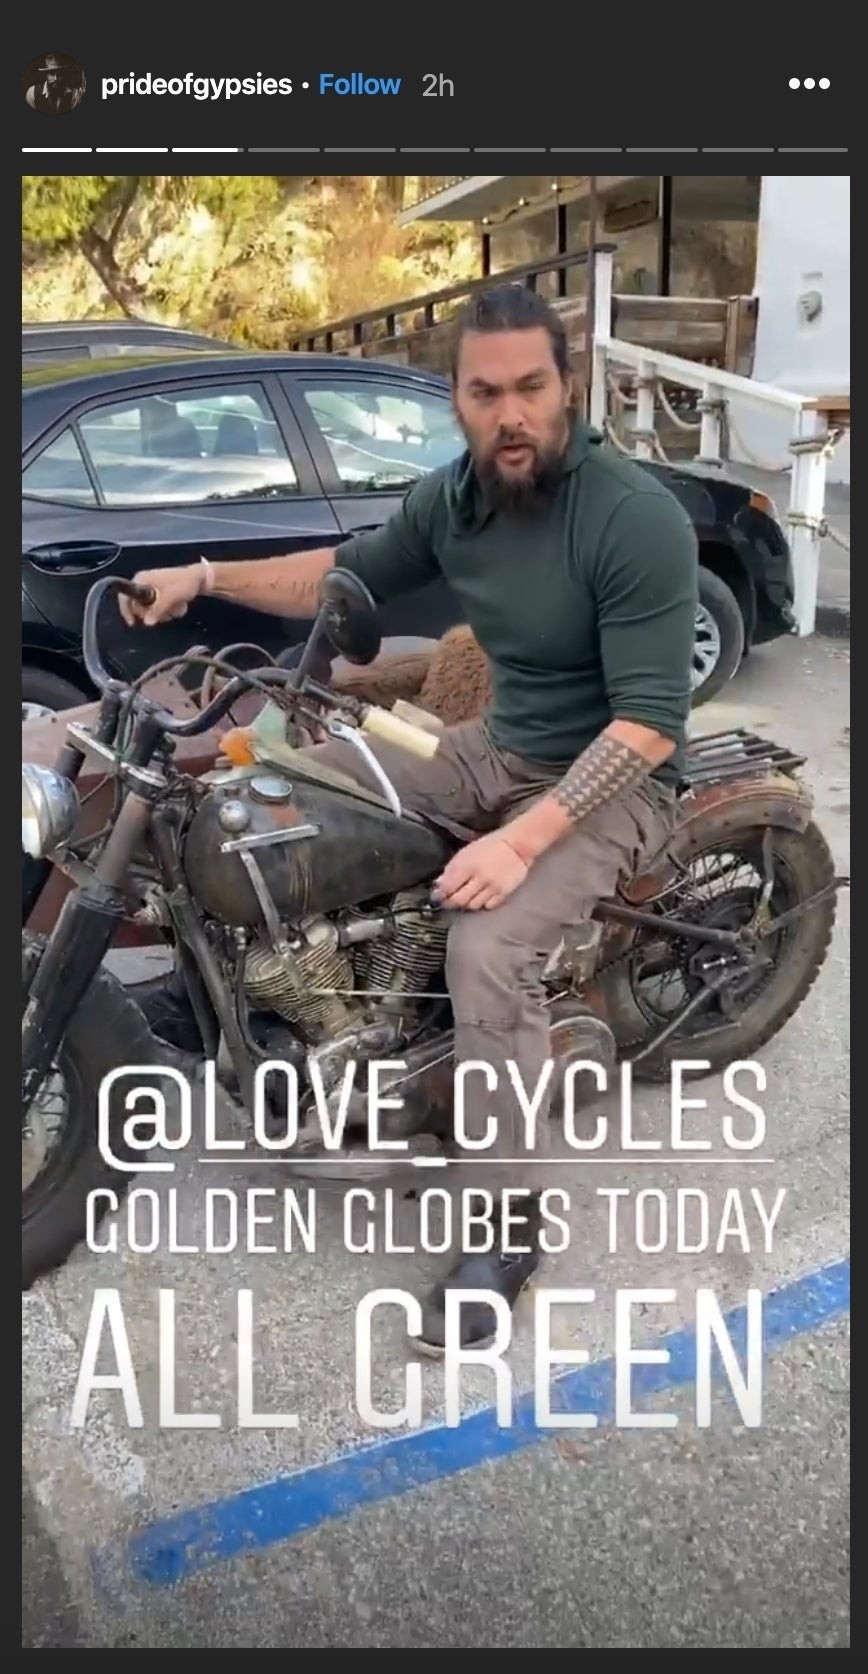 Jason Momoa Takes Good Care Of His Old Bikes As He Works To Make Another One Purr Autoevolution